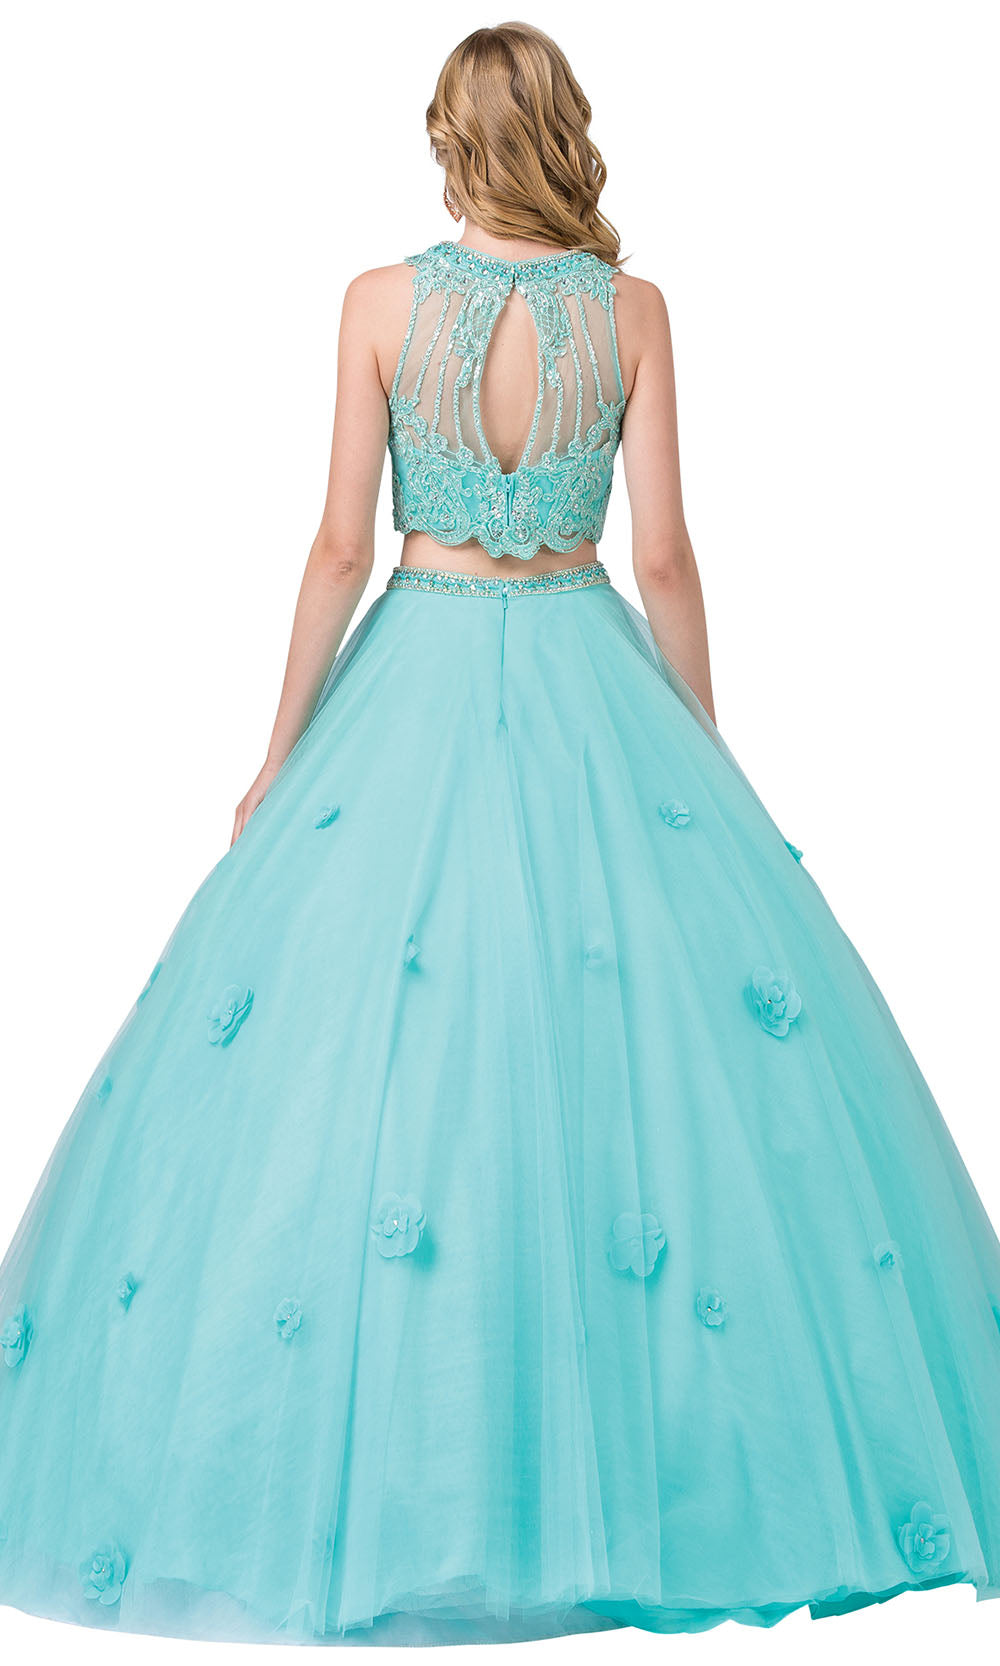 Dancing Queen - 1302 Two Piece Floral Ballgown In Blue